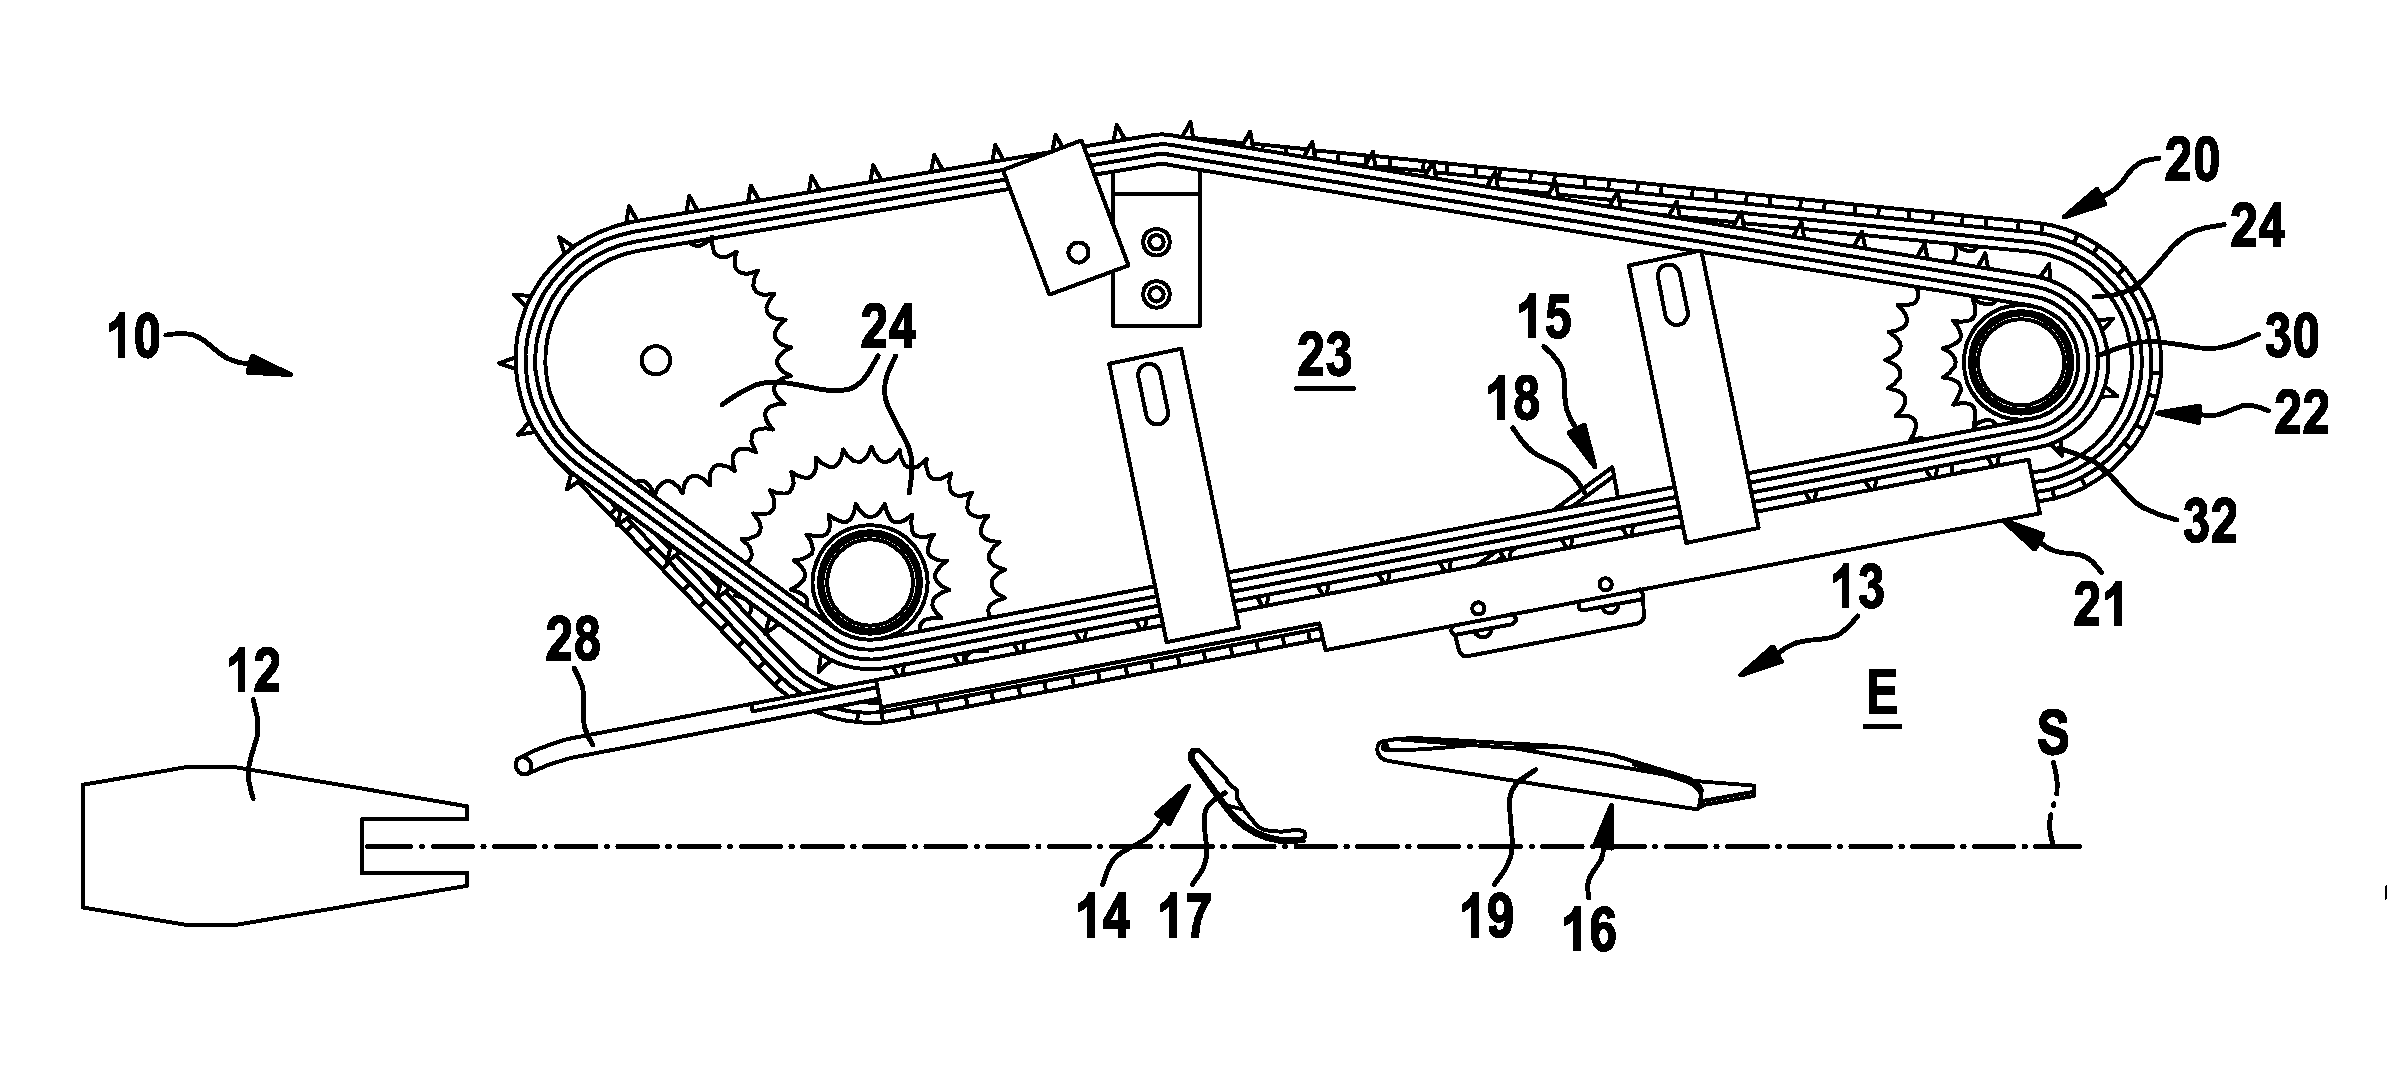 Apparatus and method for automated cutting of the wings from poultry bodies